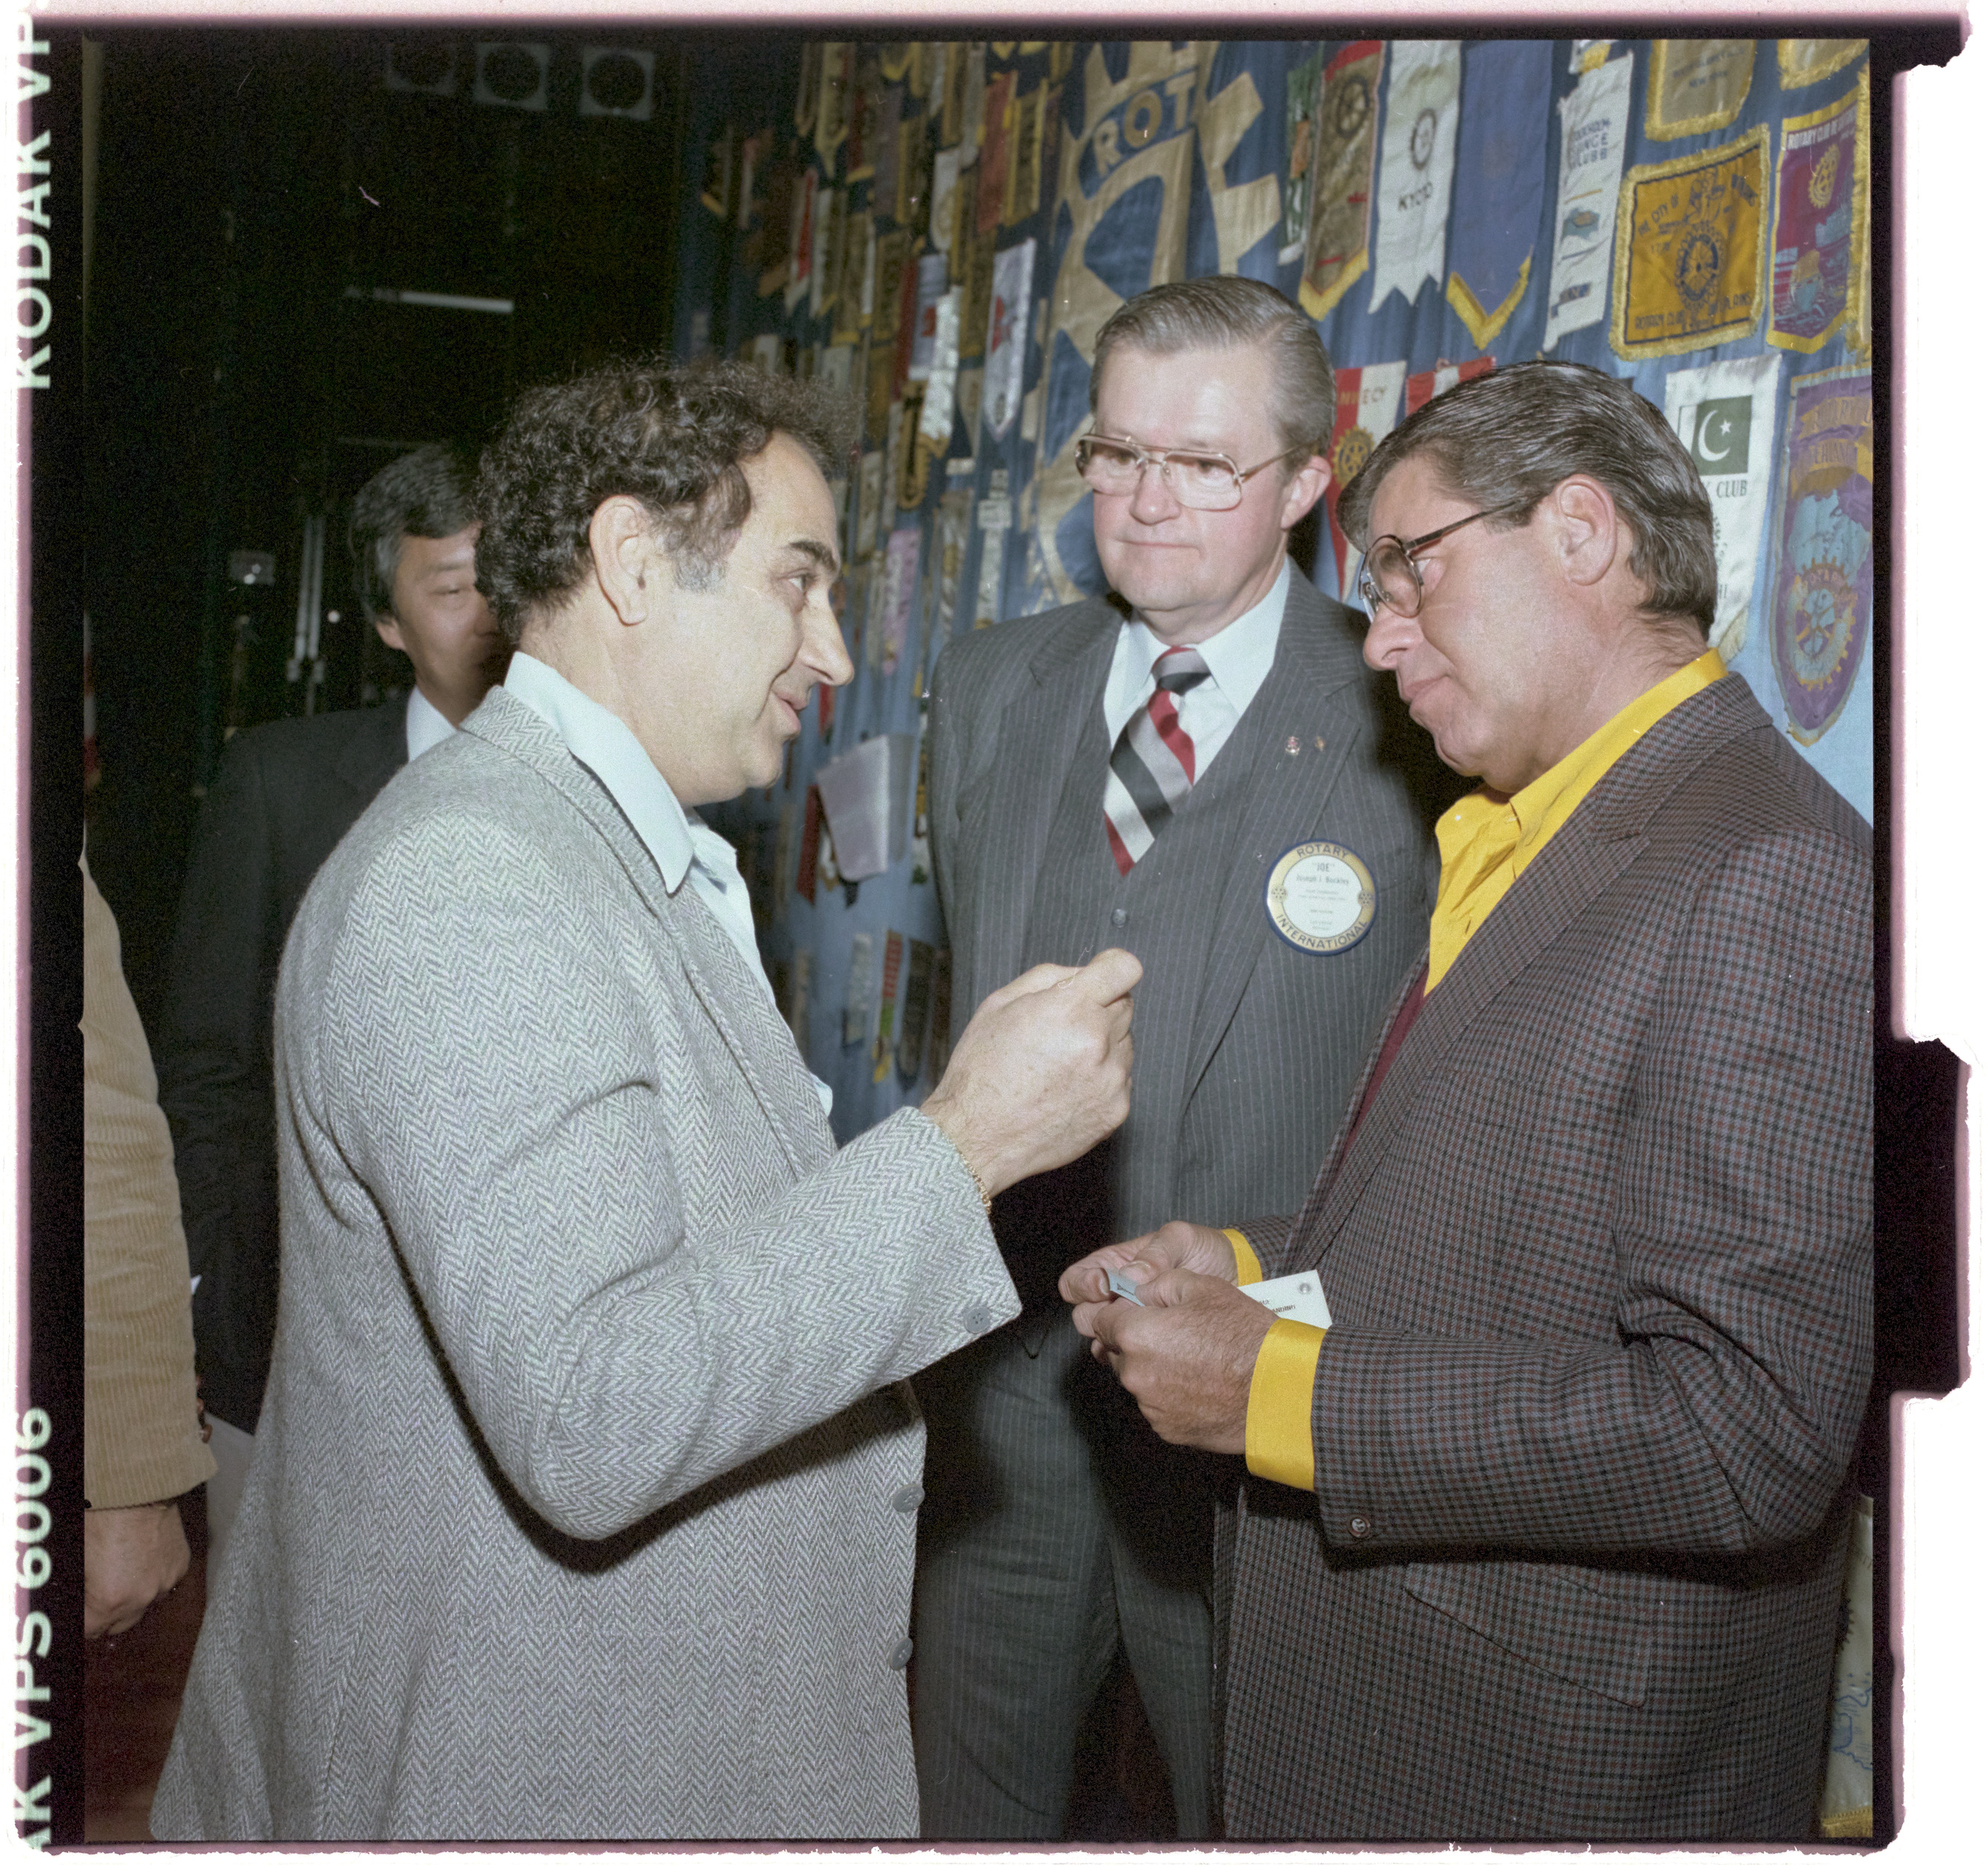 Photographs of Las Vegas Rotary Jerry Lewis, image 03